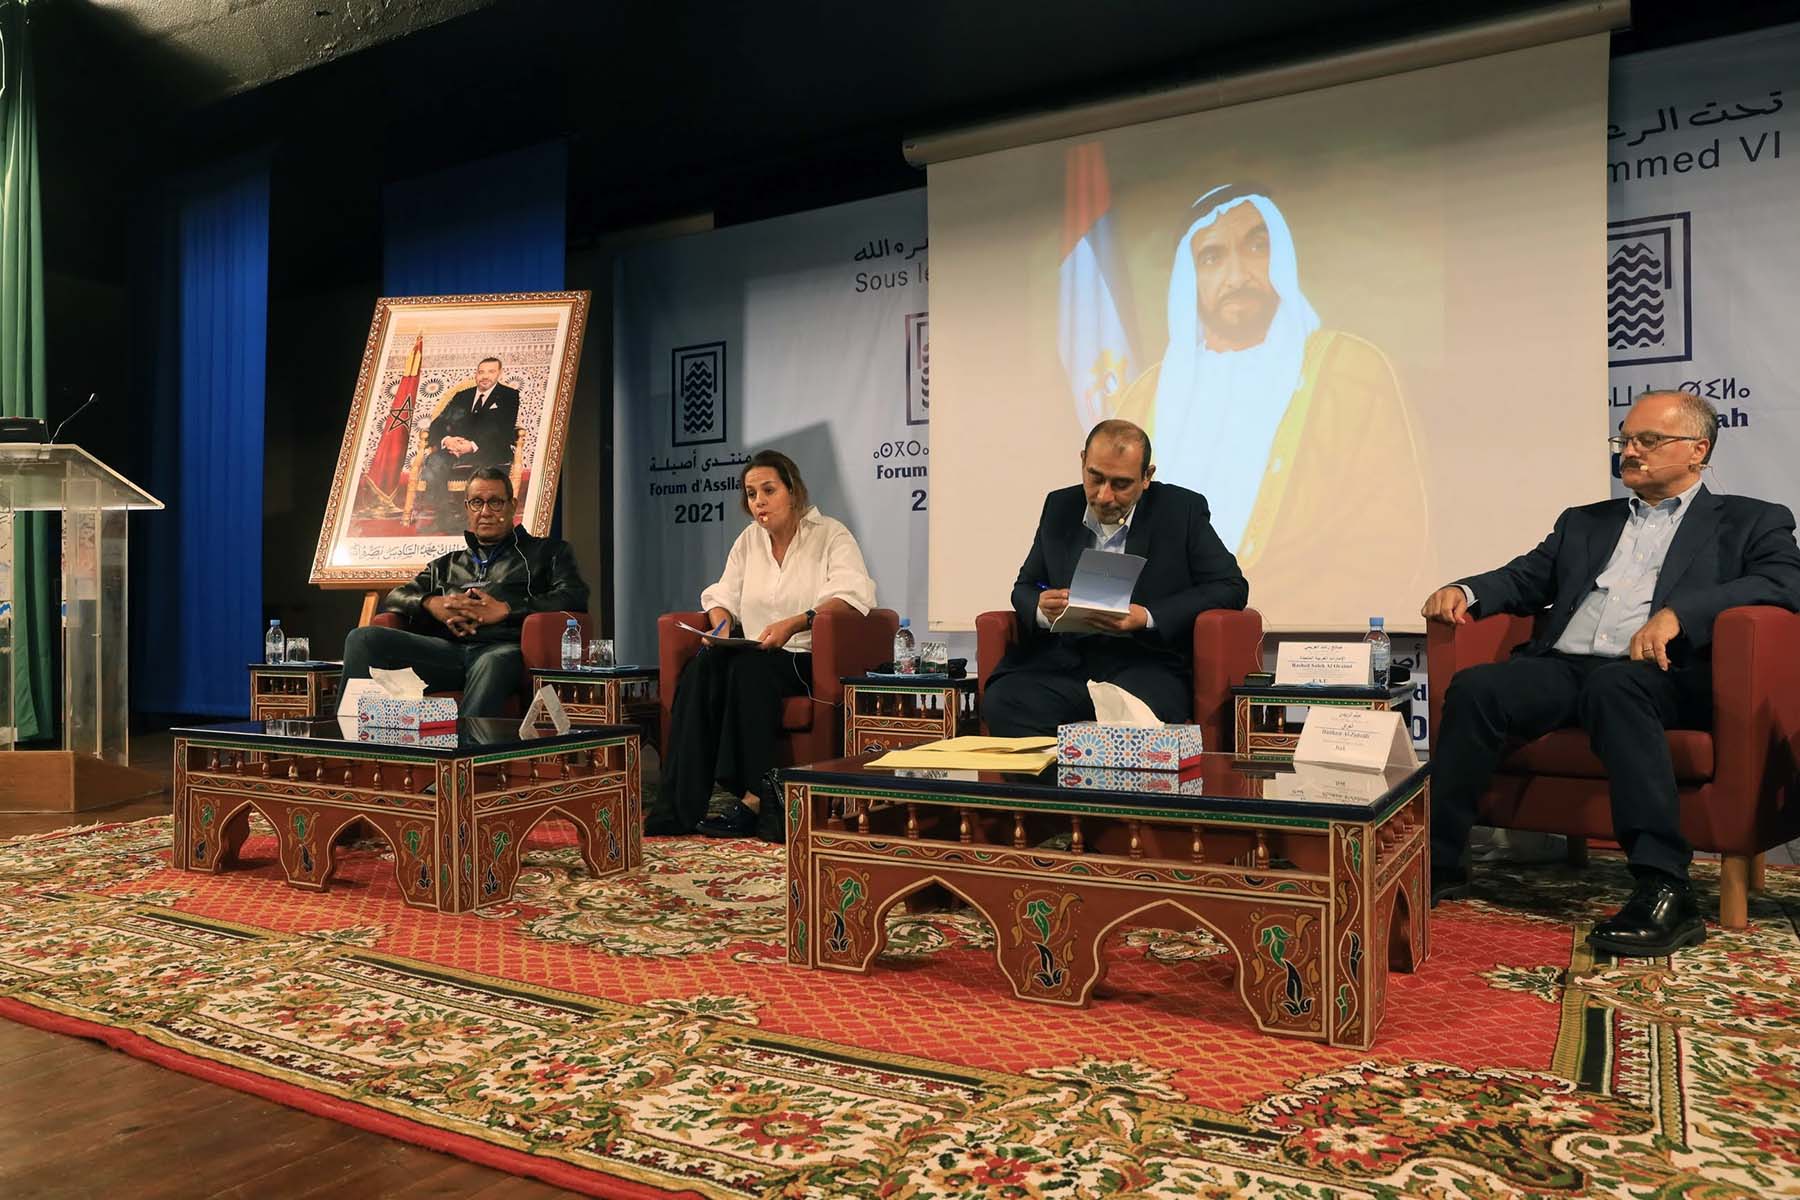 The panel discussing Sheikh Zayed's leadership